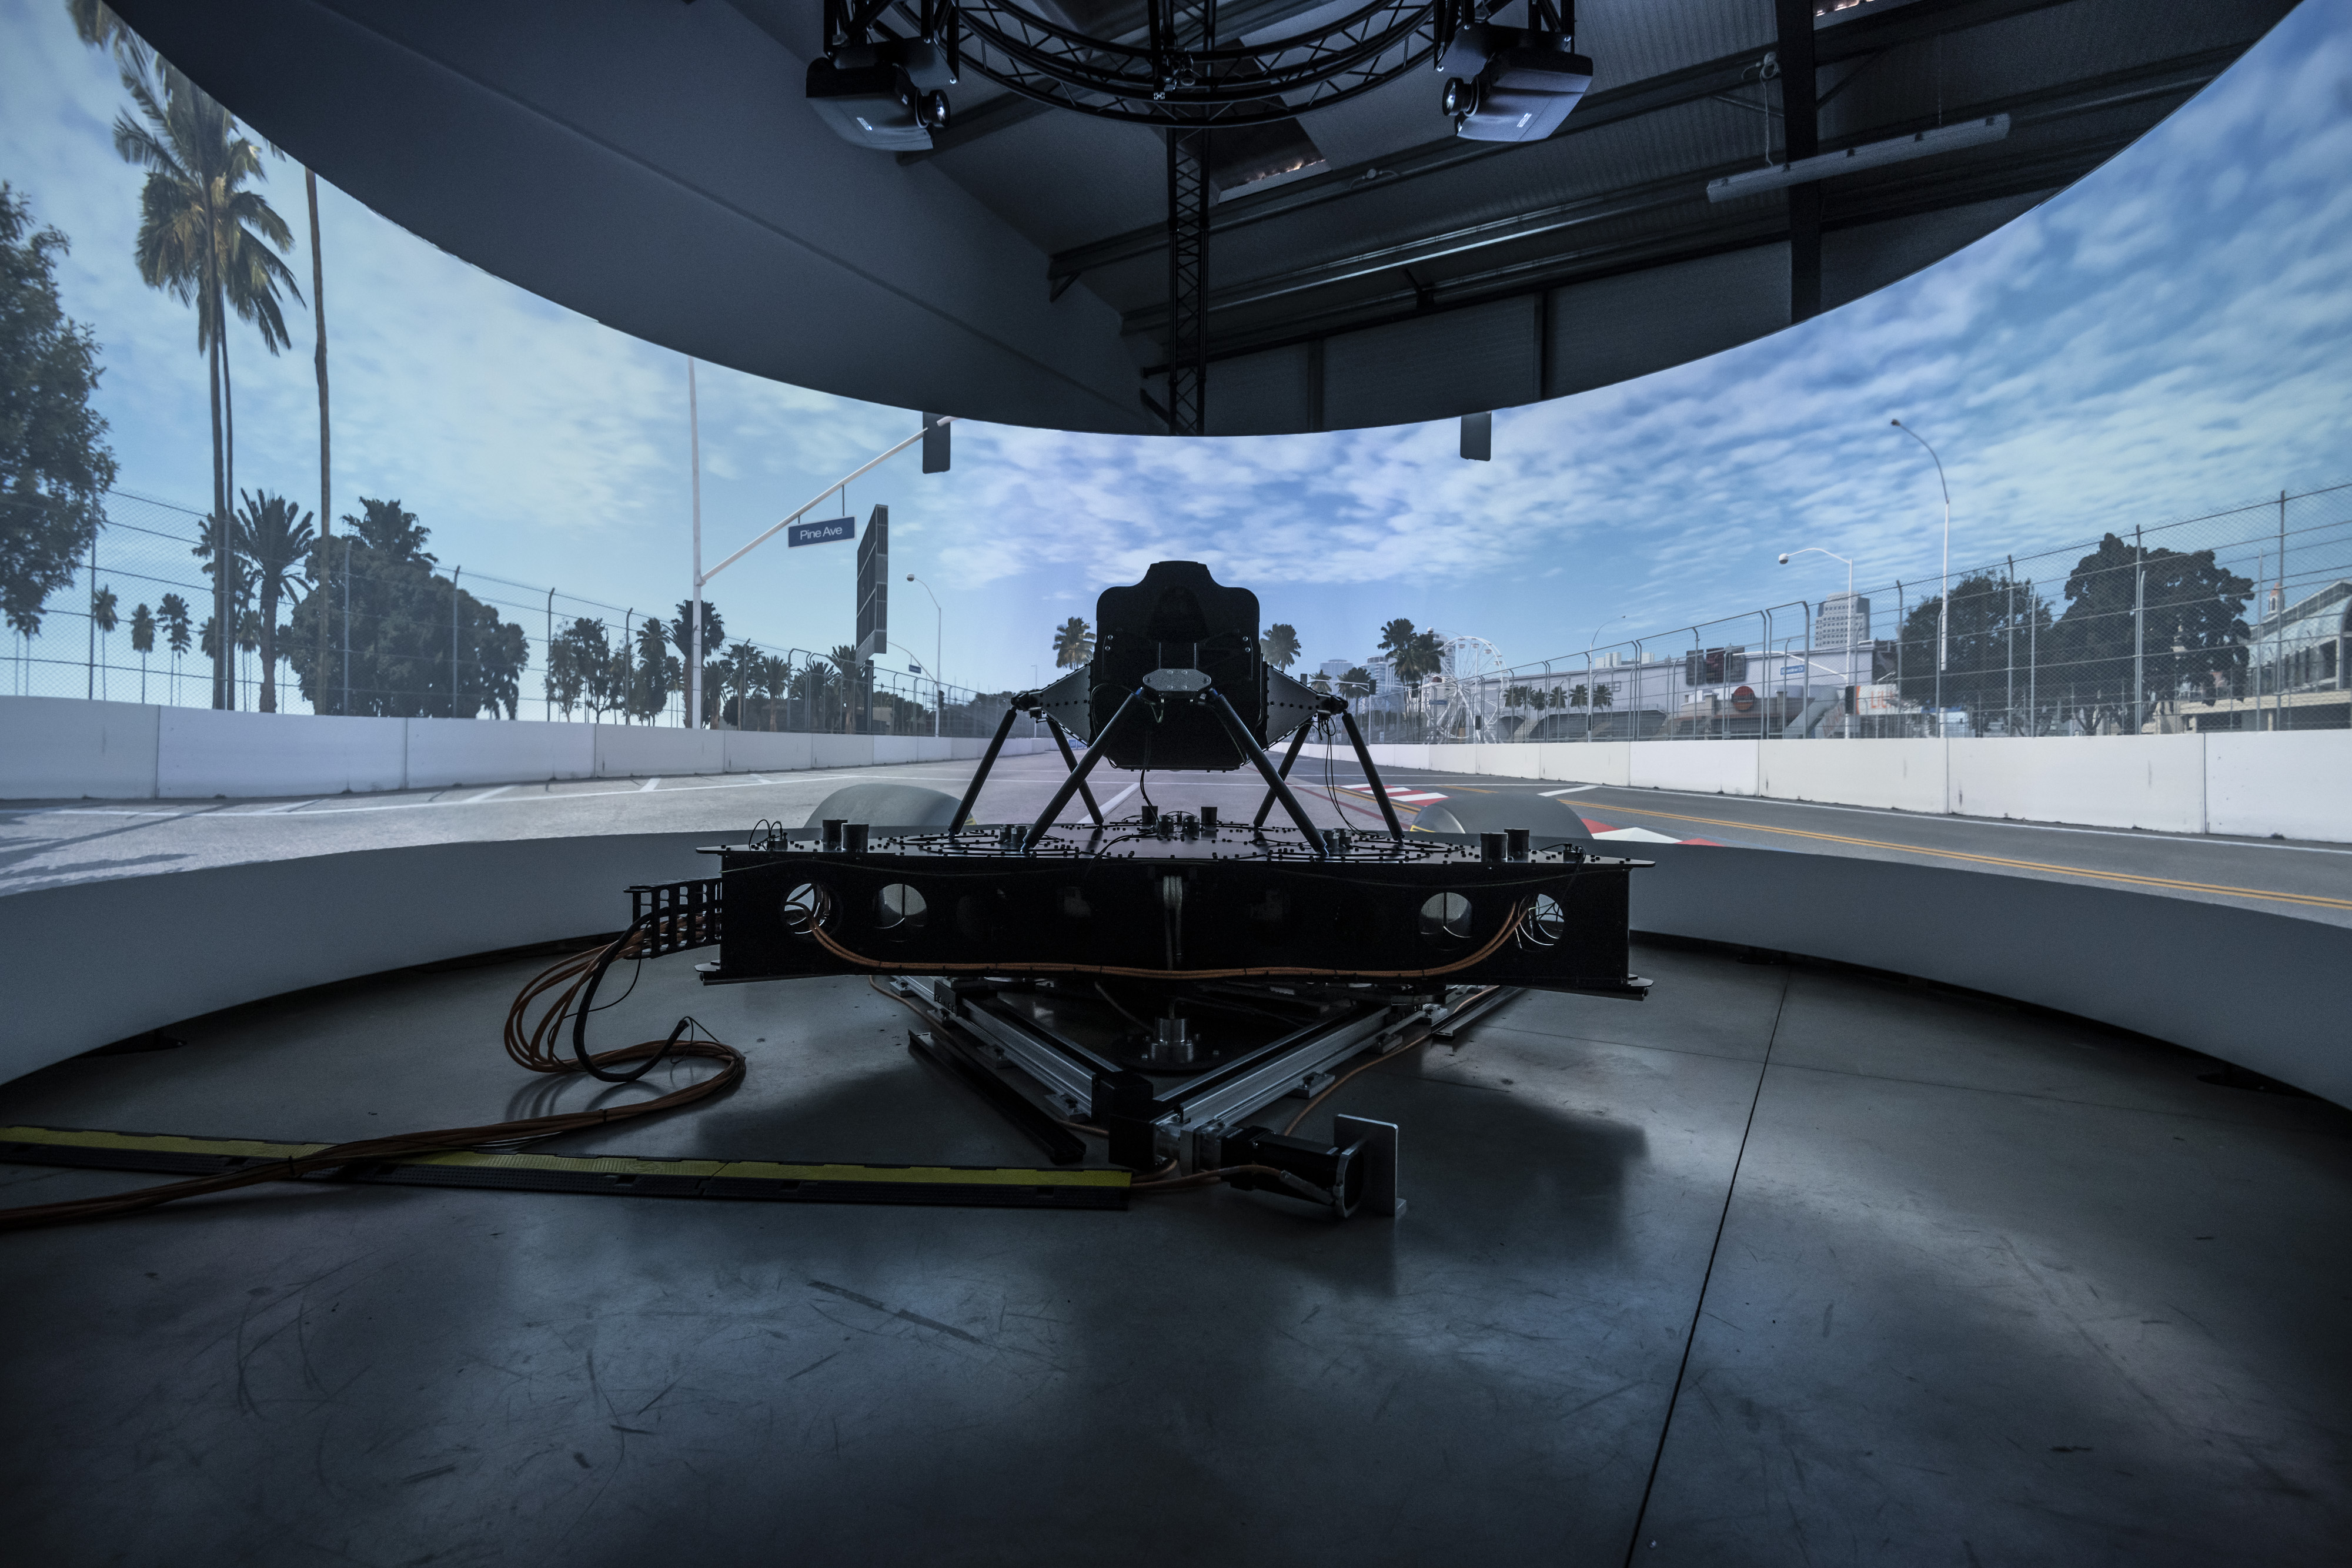 How to harness driver-in-the-loop simulators  Automotive Testing  Technology International